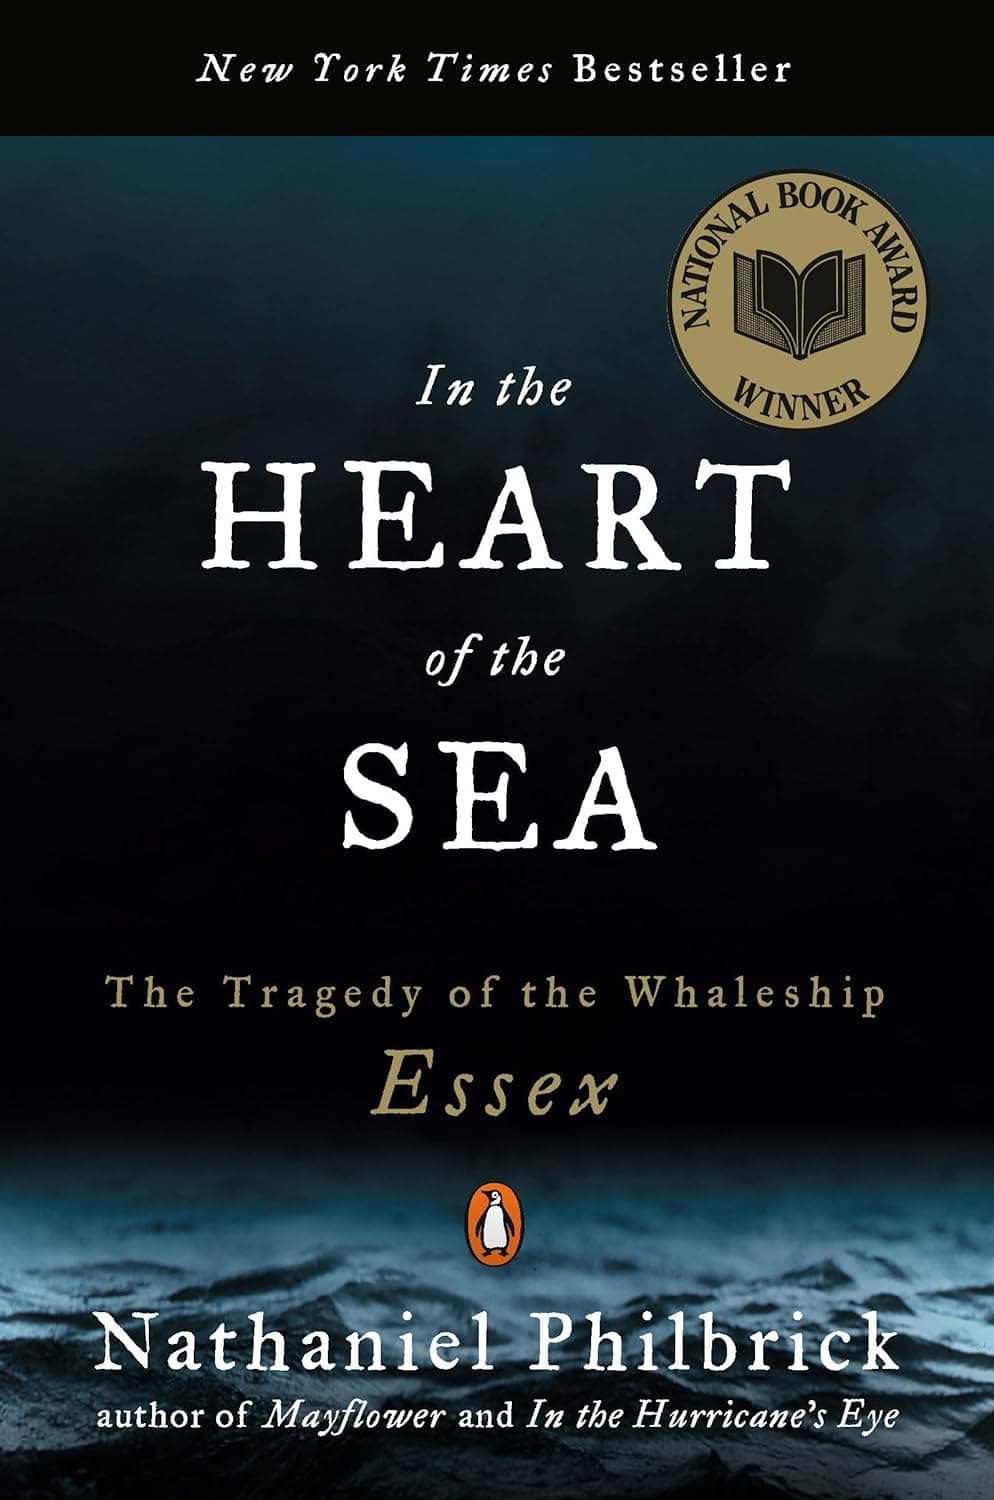 Penguin Books In the Heart of the Sea: The Tragedy of the Whaleship Essex by Nathaniel Philbrick